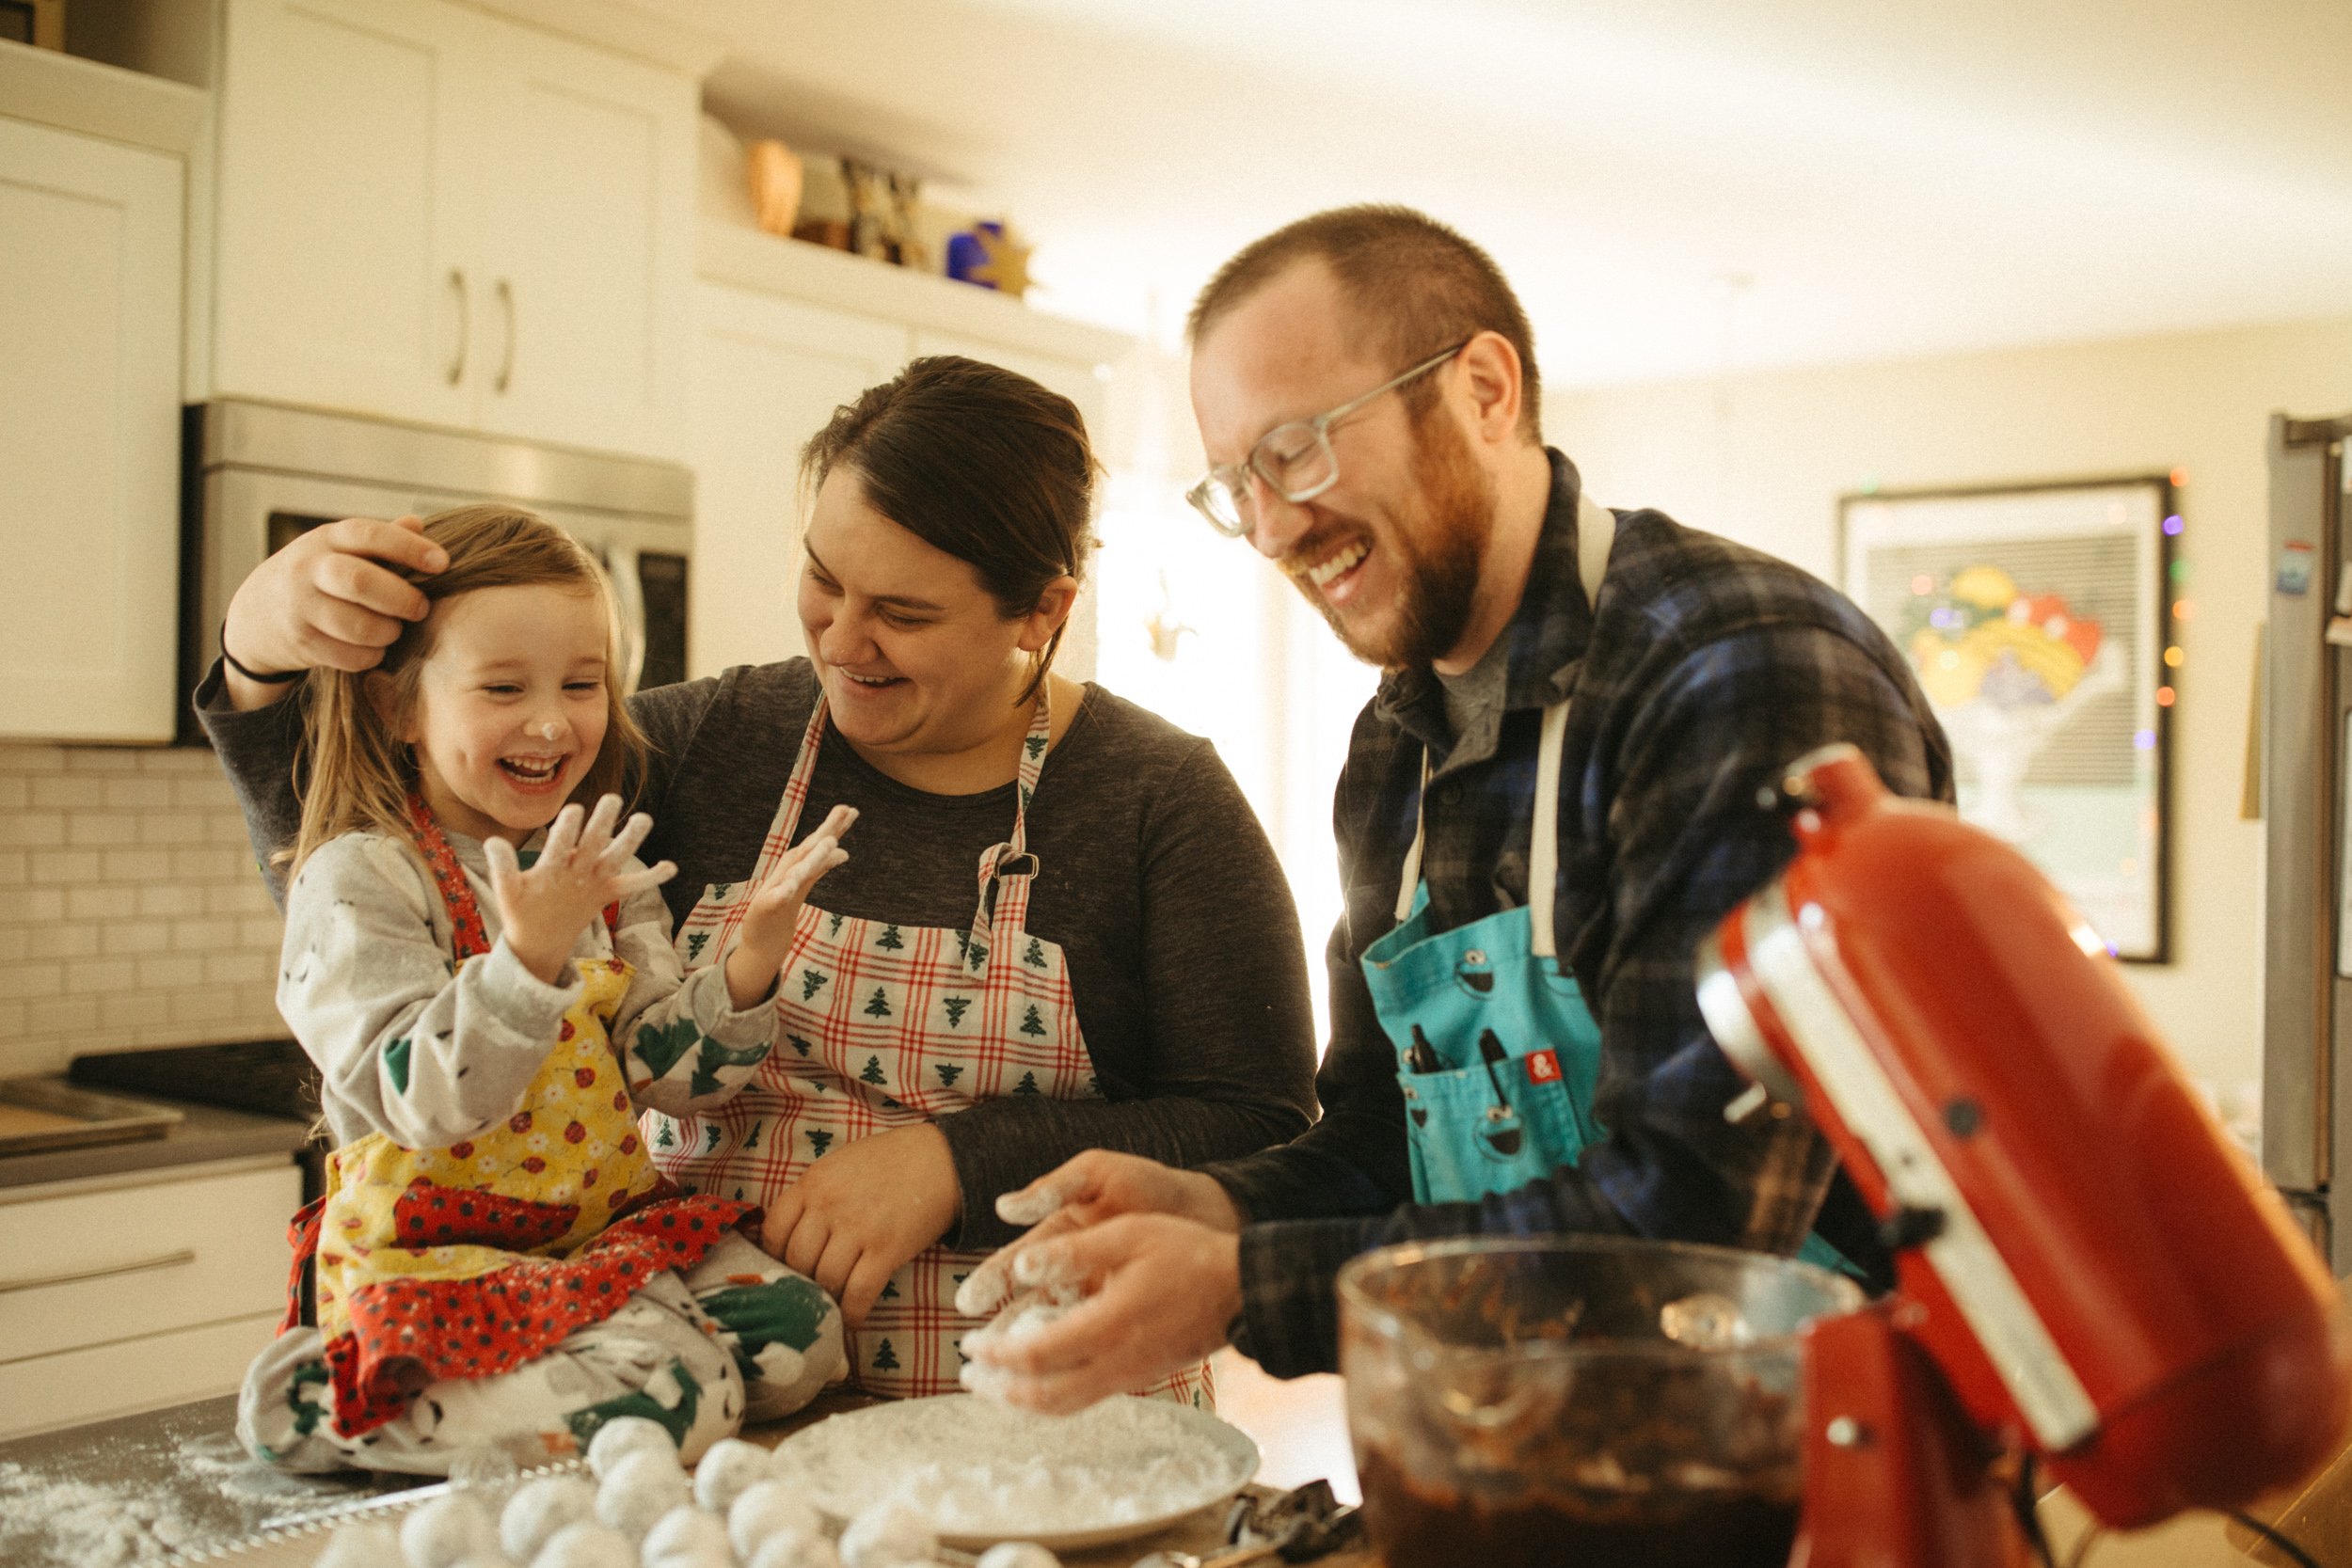 in home session northwest indiana nwi michigan city family documentary film lifestyle photographer baking Christmas cookies -8.jpg